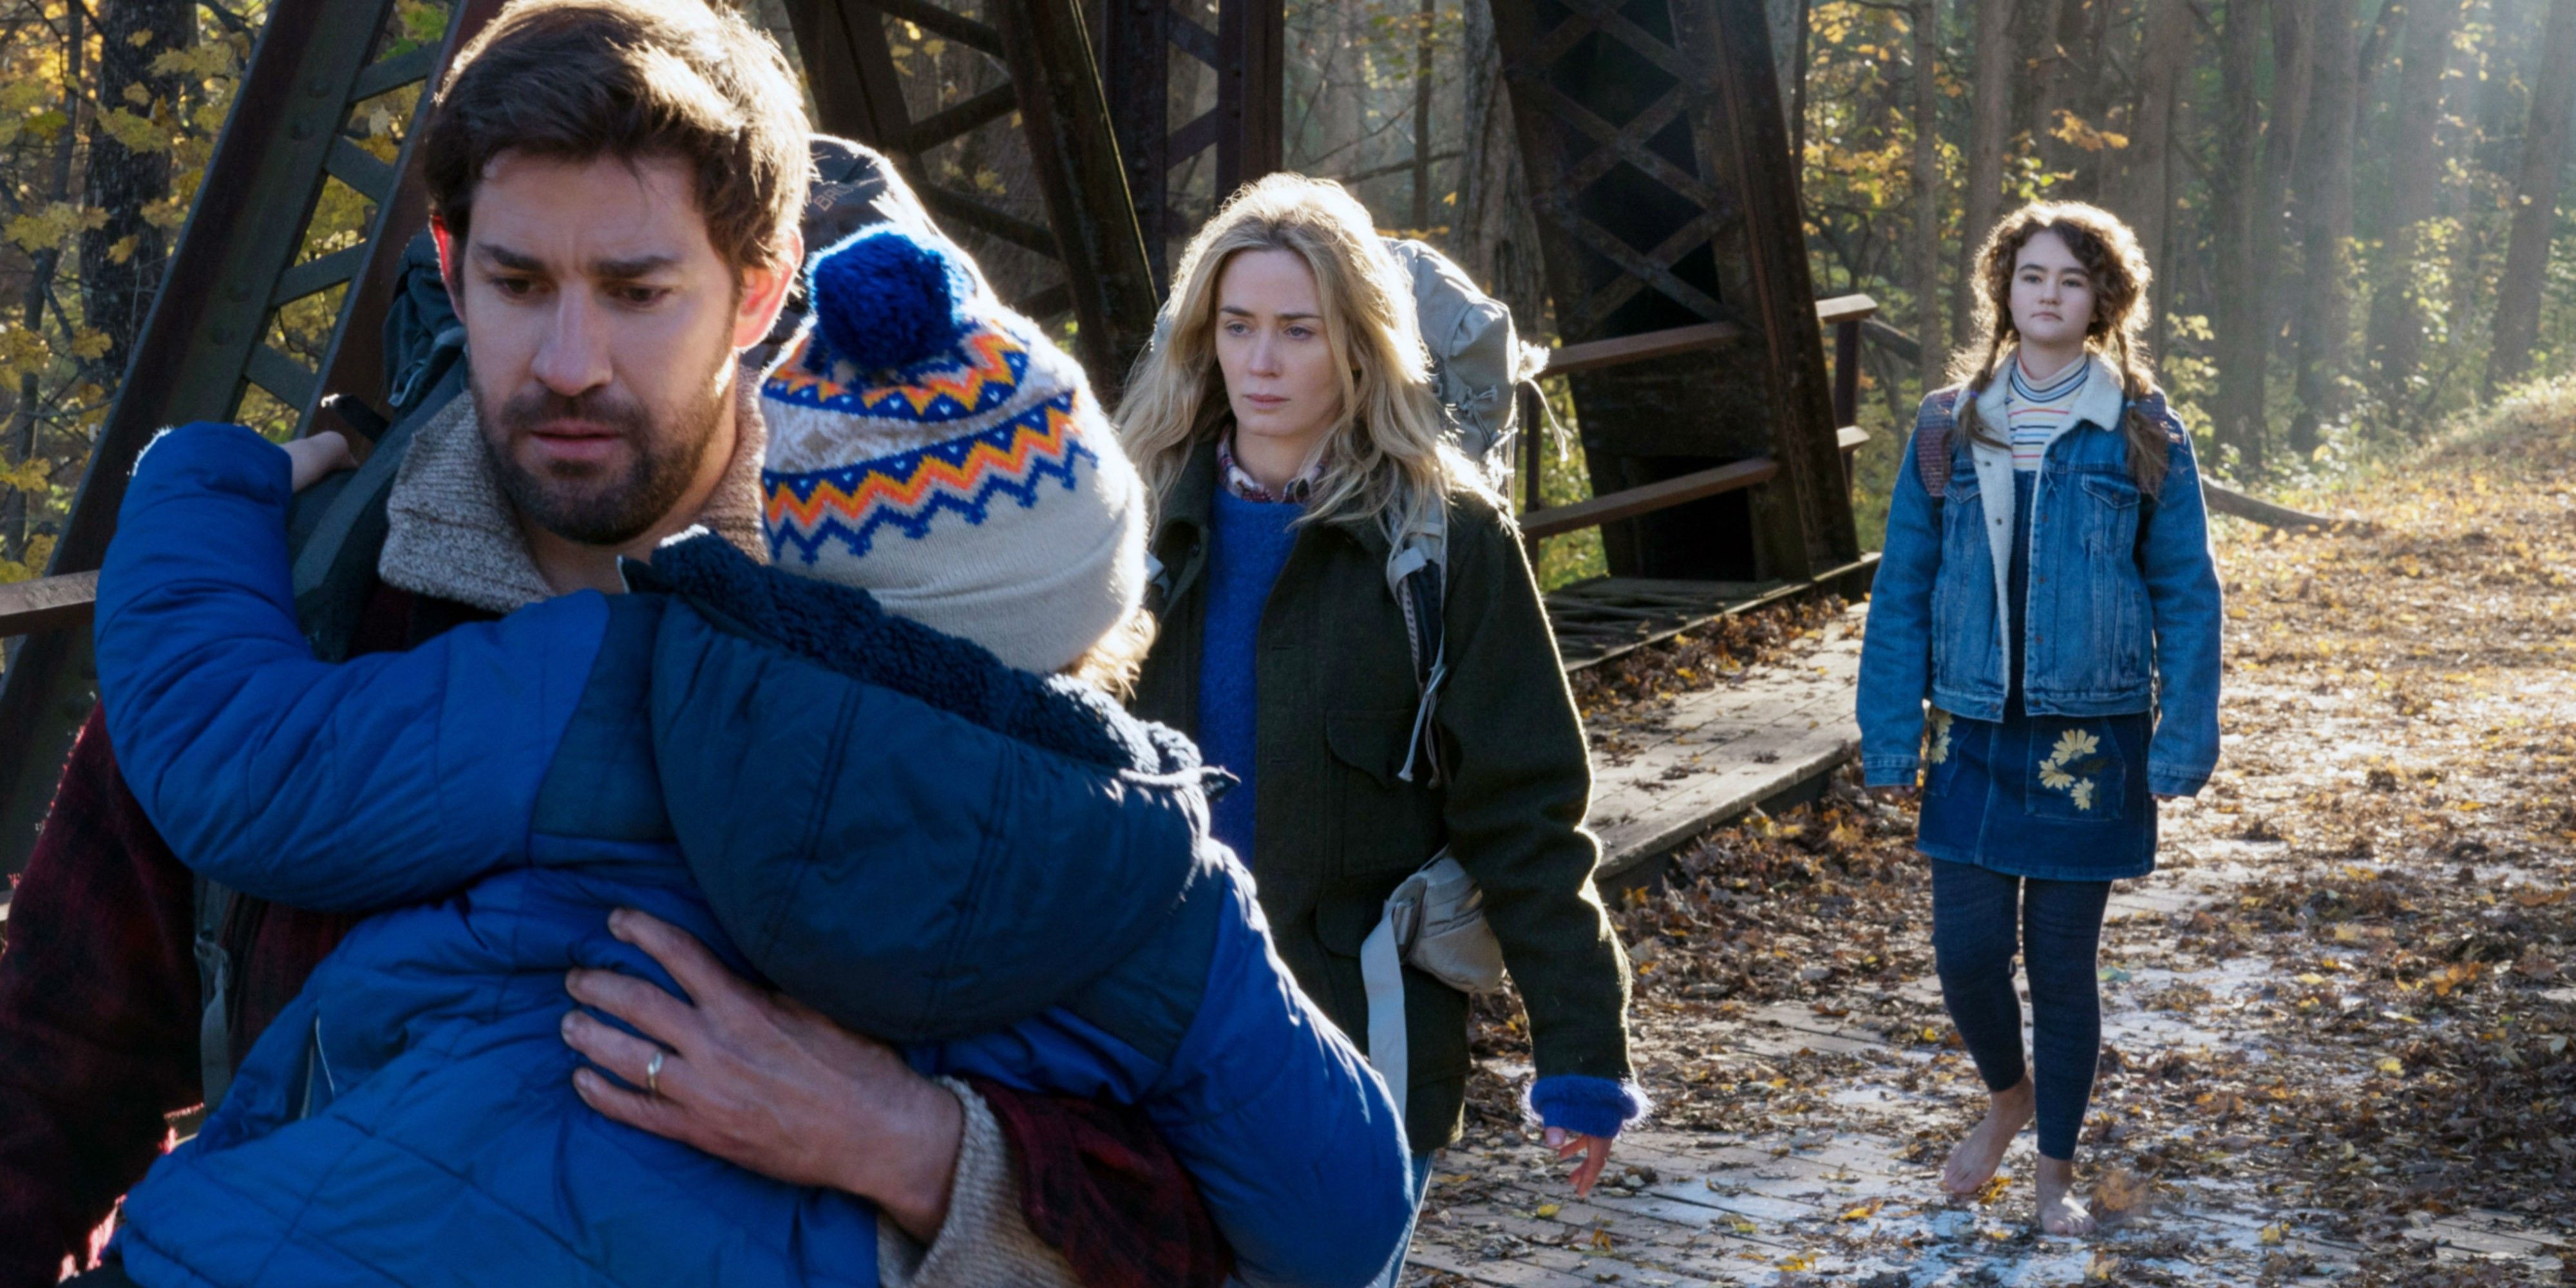 A family escapes in the woods in A Quiet Place.